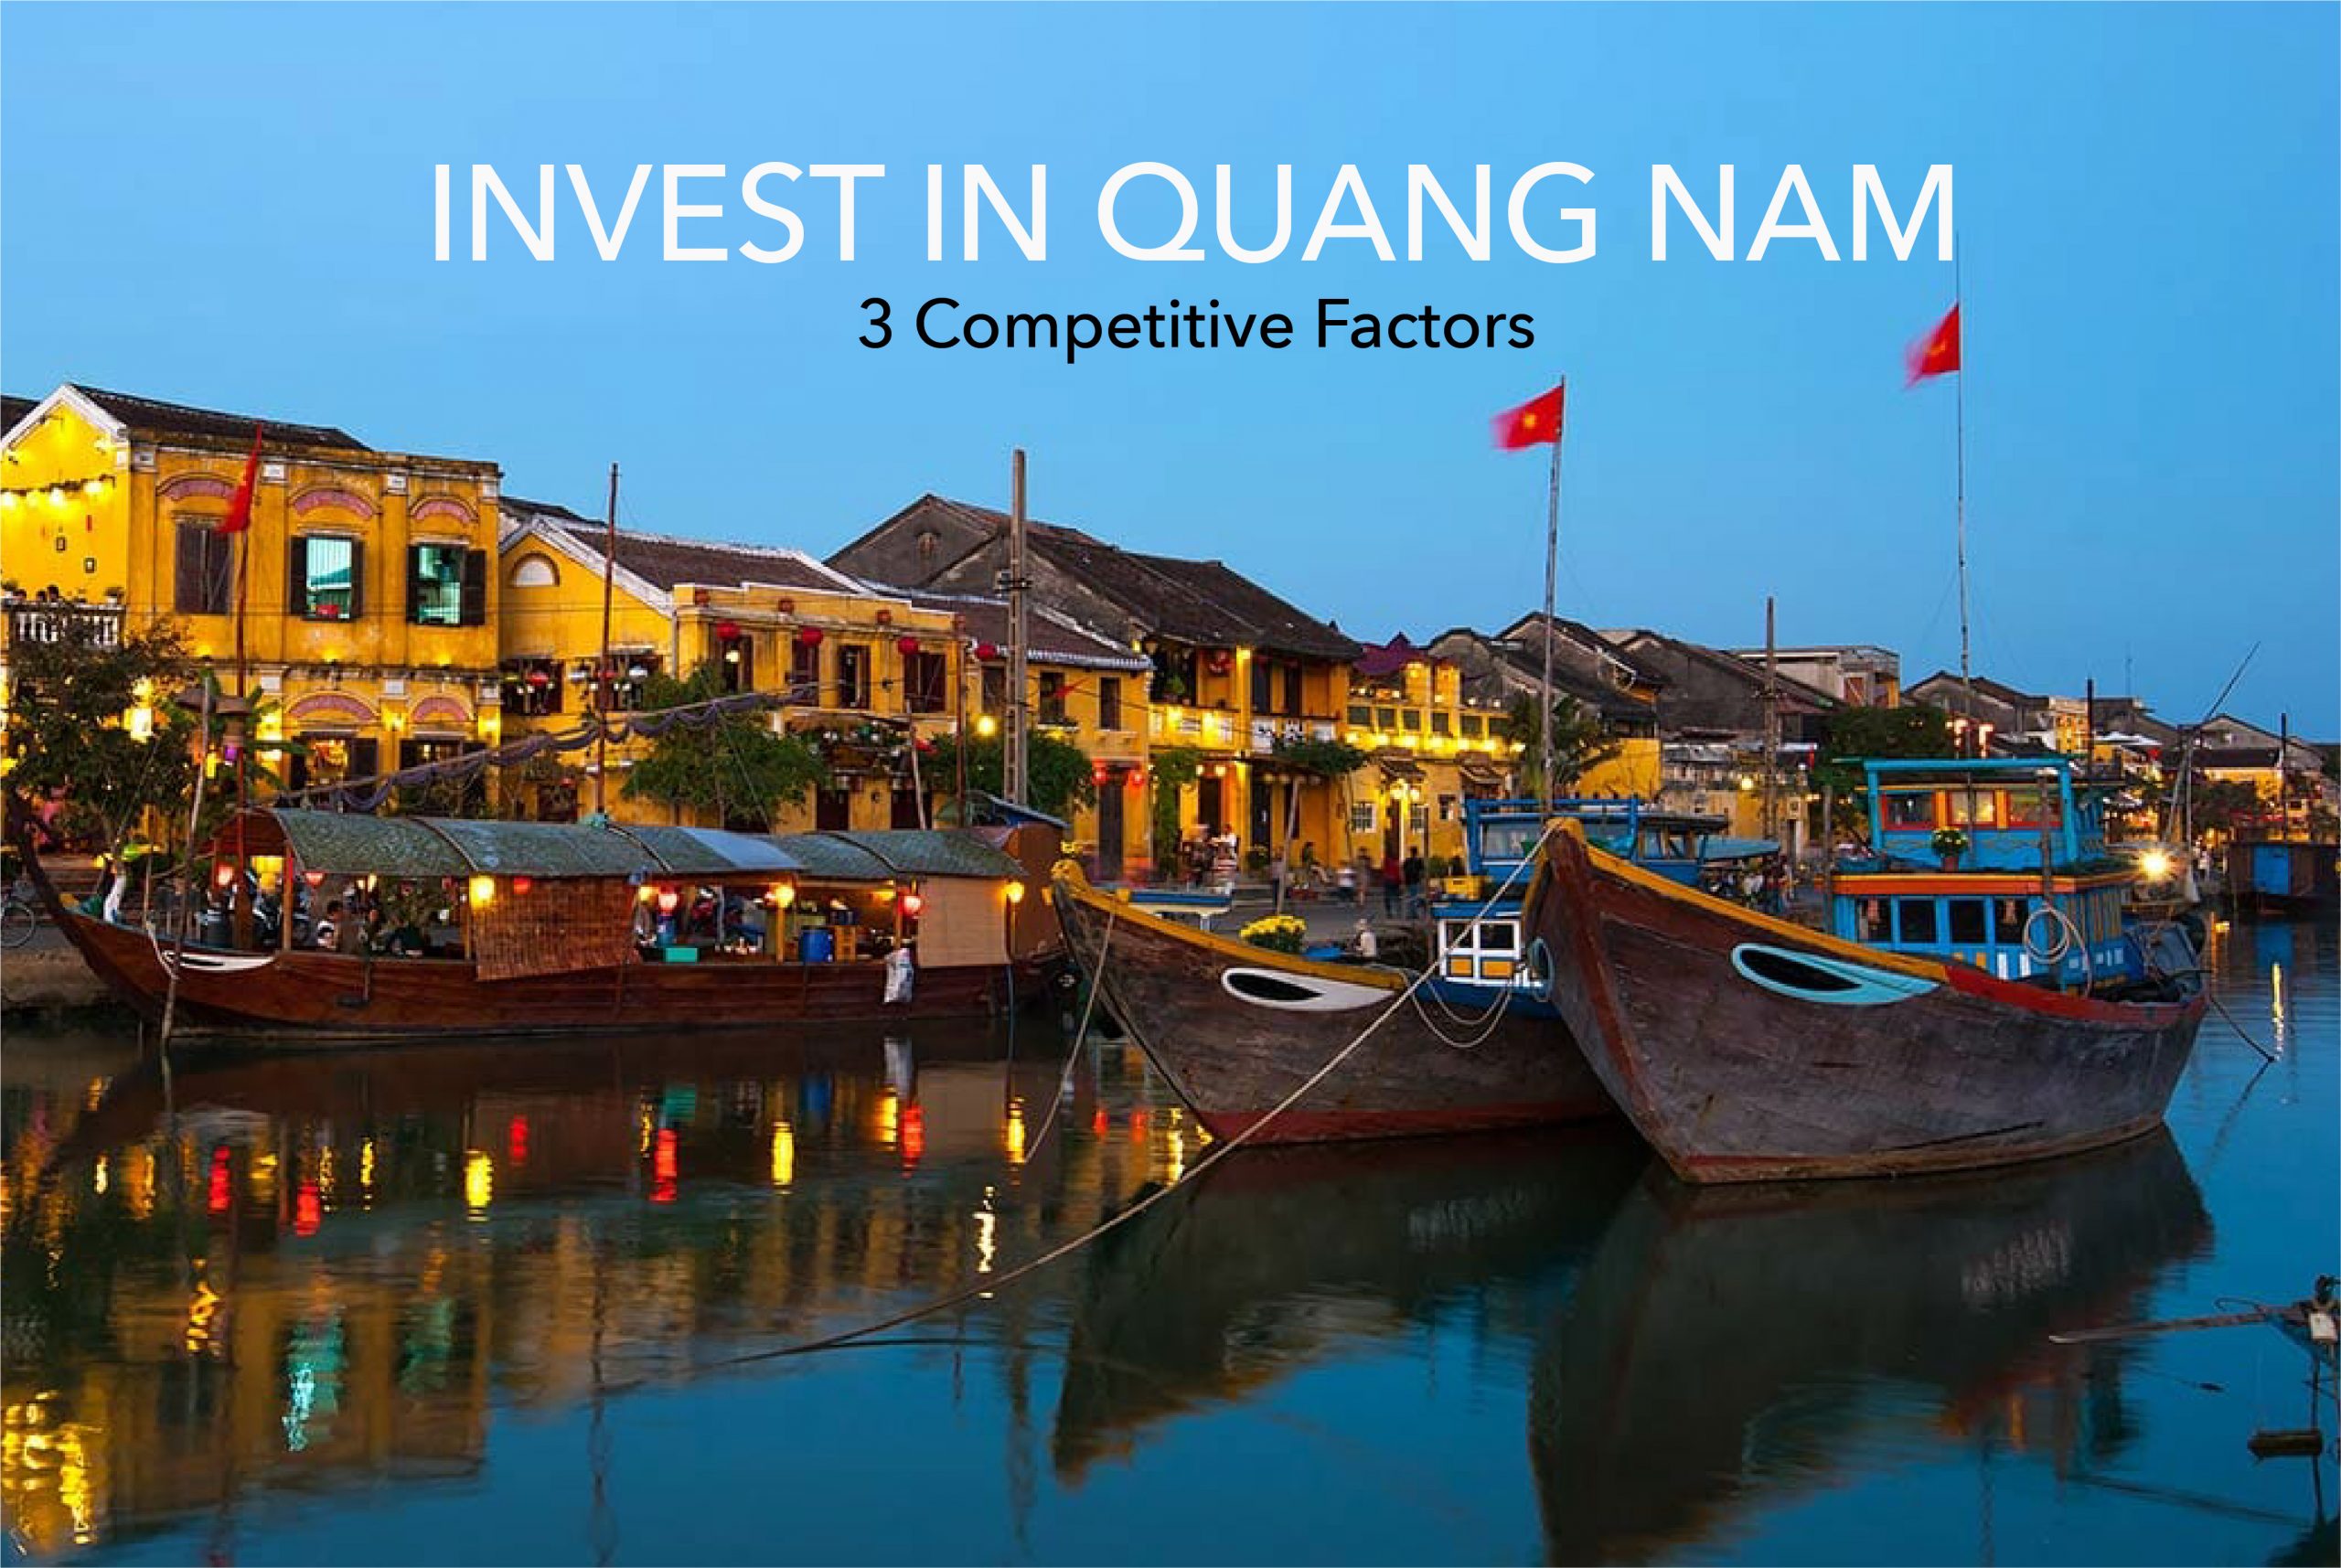 3 Competitive Factors when investing in Quang Nam